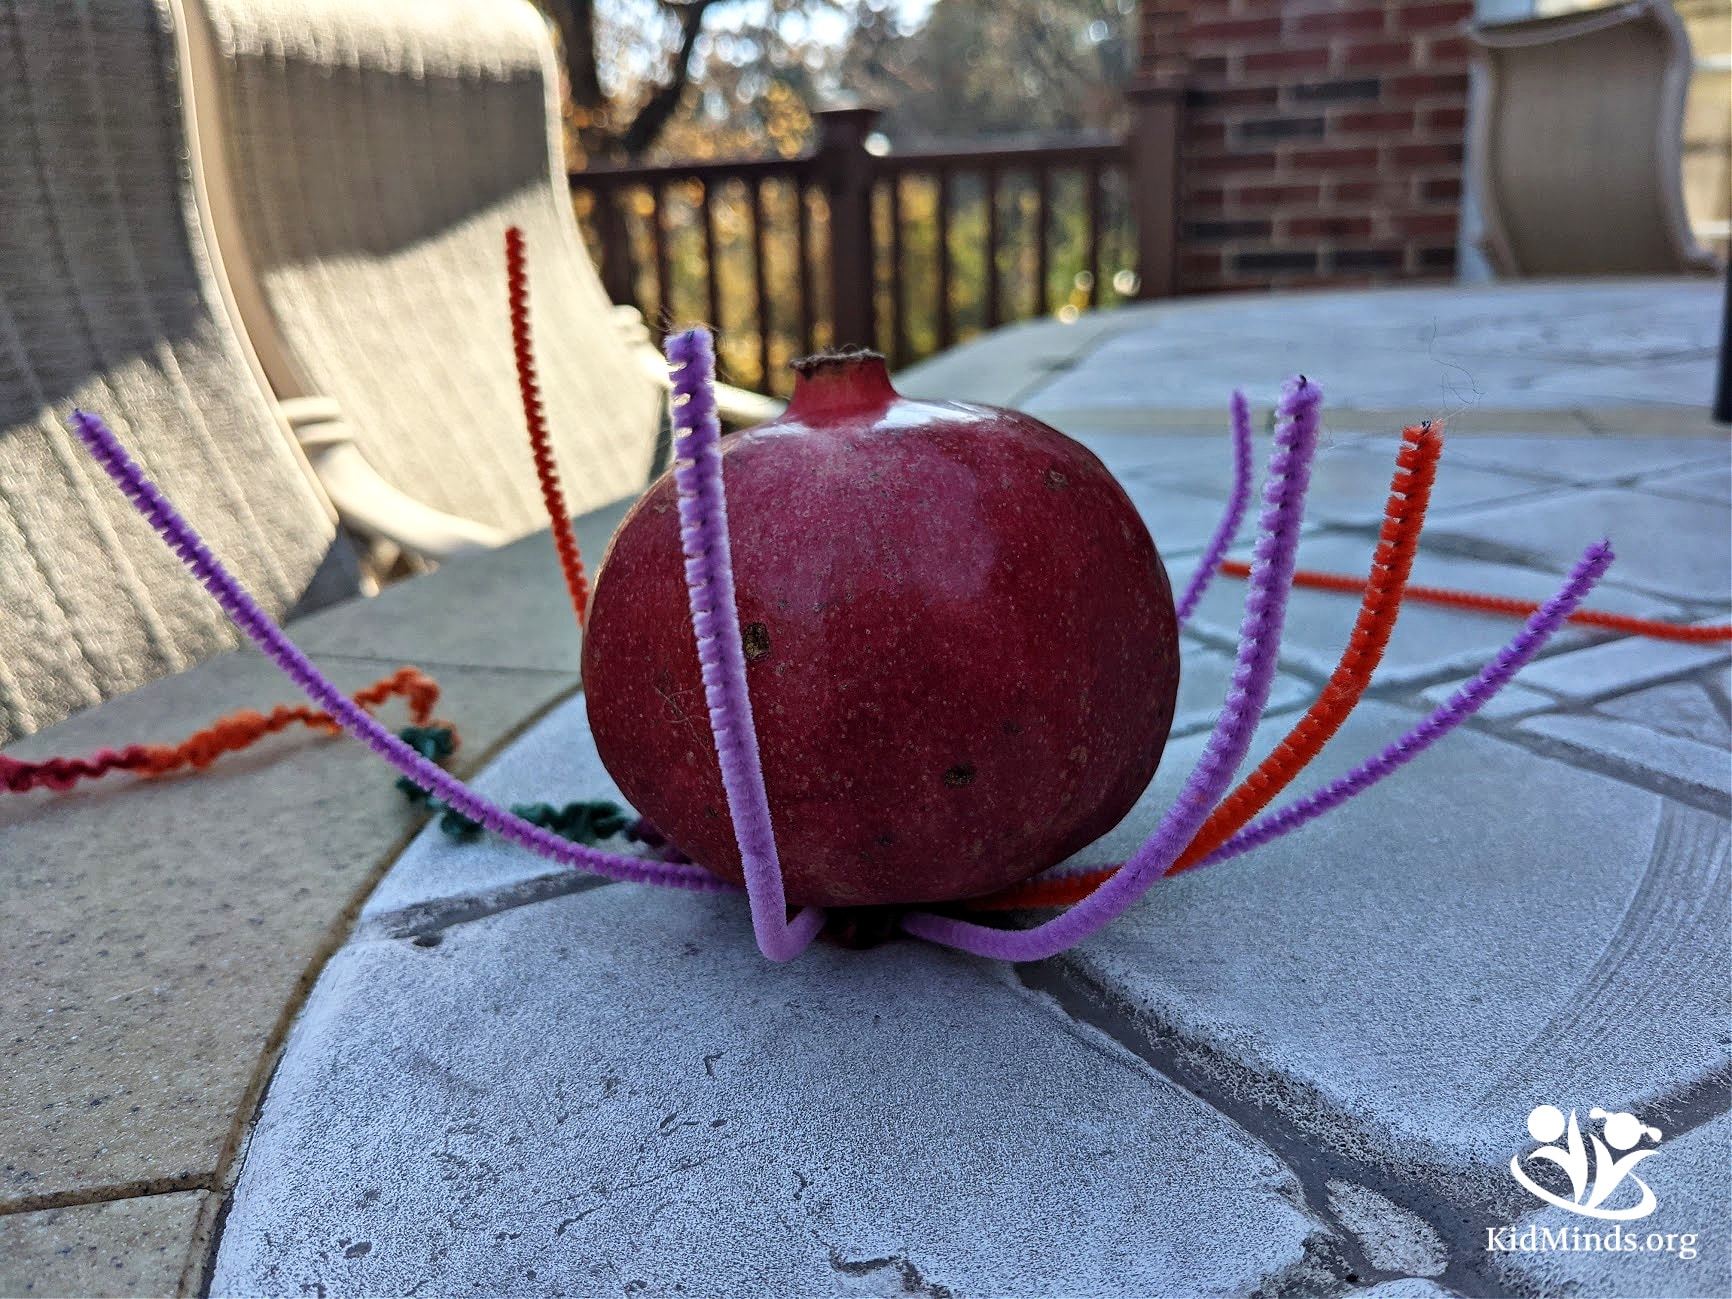 Here is an educational (and surprisingly meditative) activity to do around Thanksgiving to feel like an early settler: weave a nutting basket. #fall #kidsactivities #forkids #history #laughingkidslearn #kidminds #mentalhealth4kids